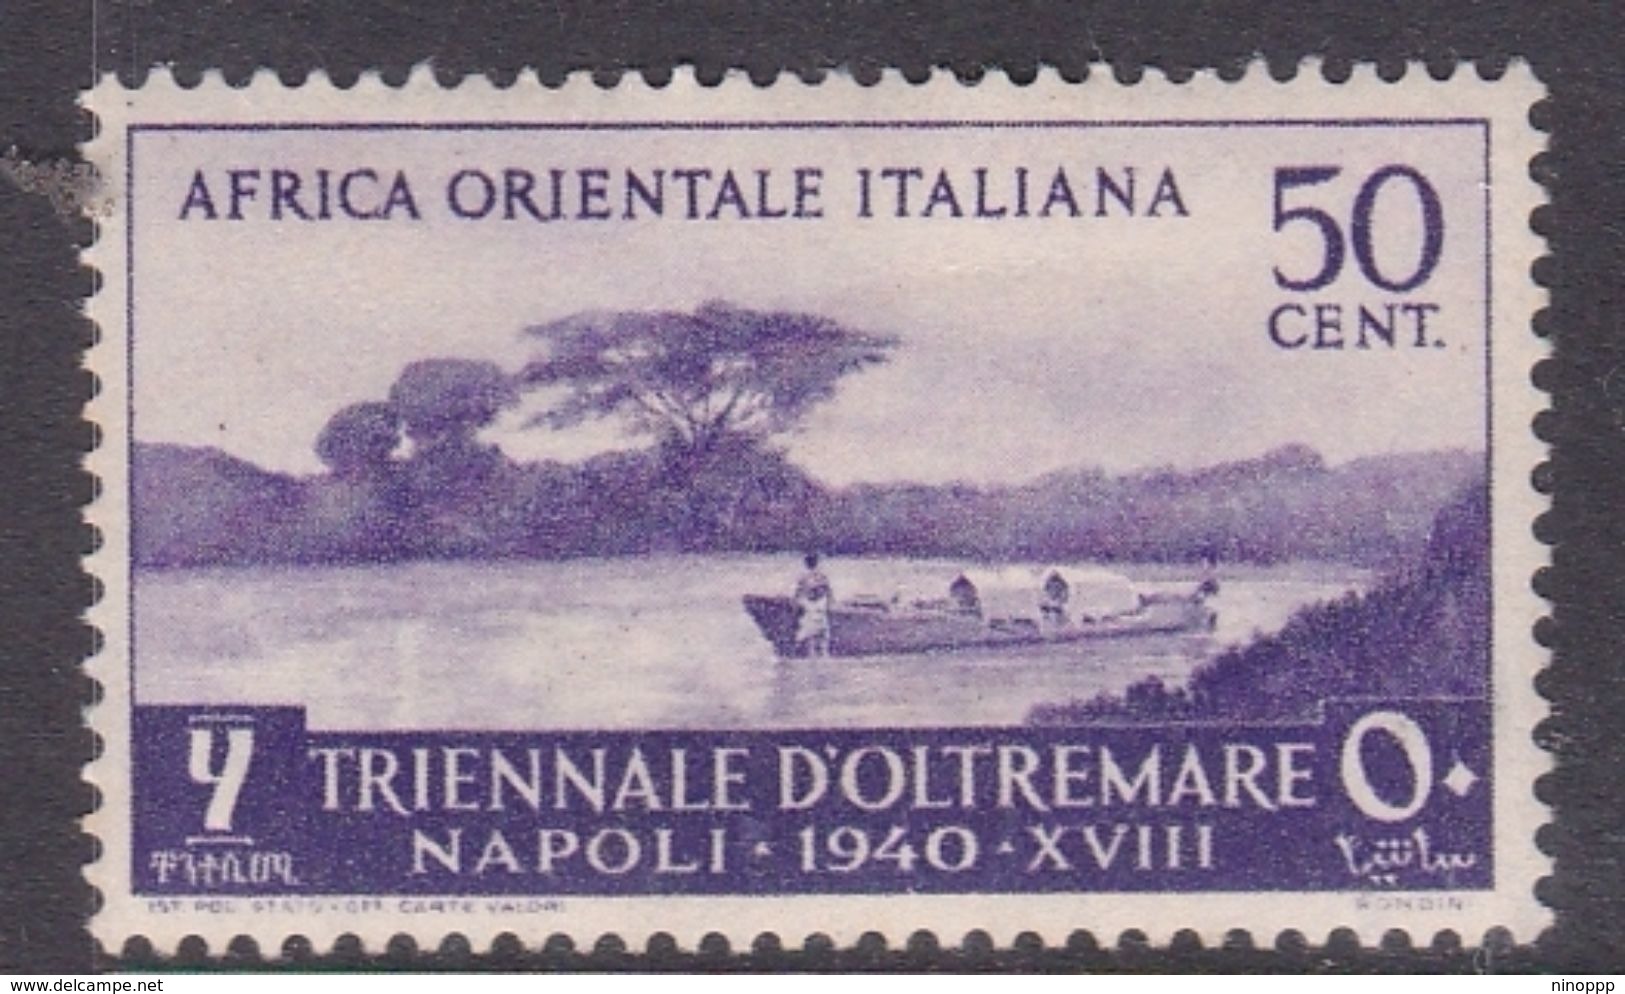 Italy-Colonies And Territories-Italian Eastern Africa S30 1940 First Triennial Overseas Exposition 50c Purple MH - Emissions Générales